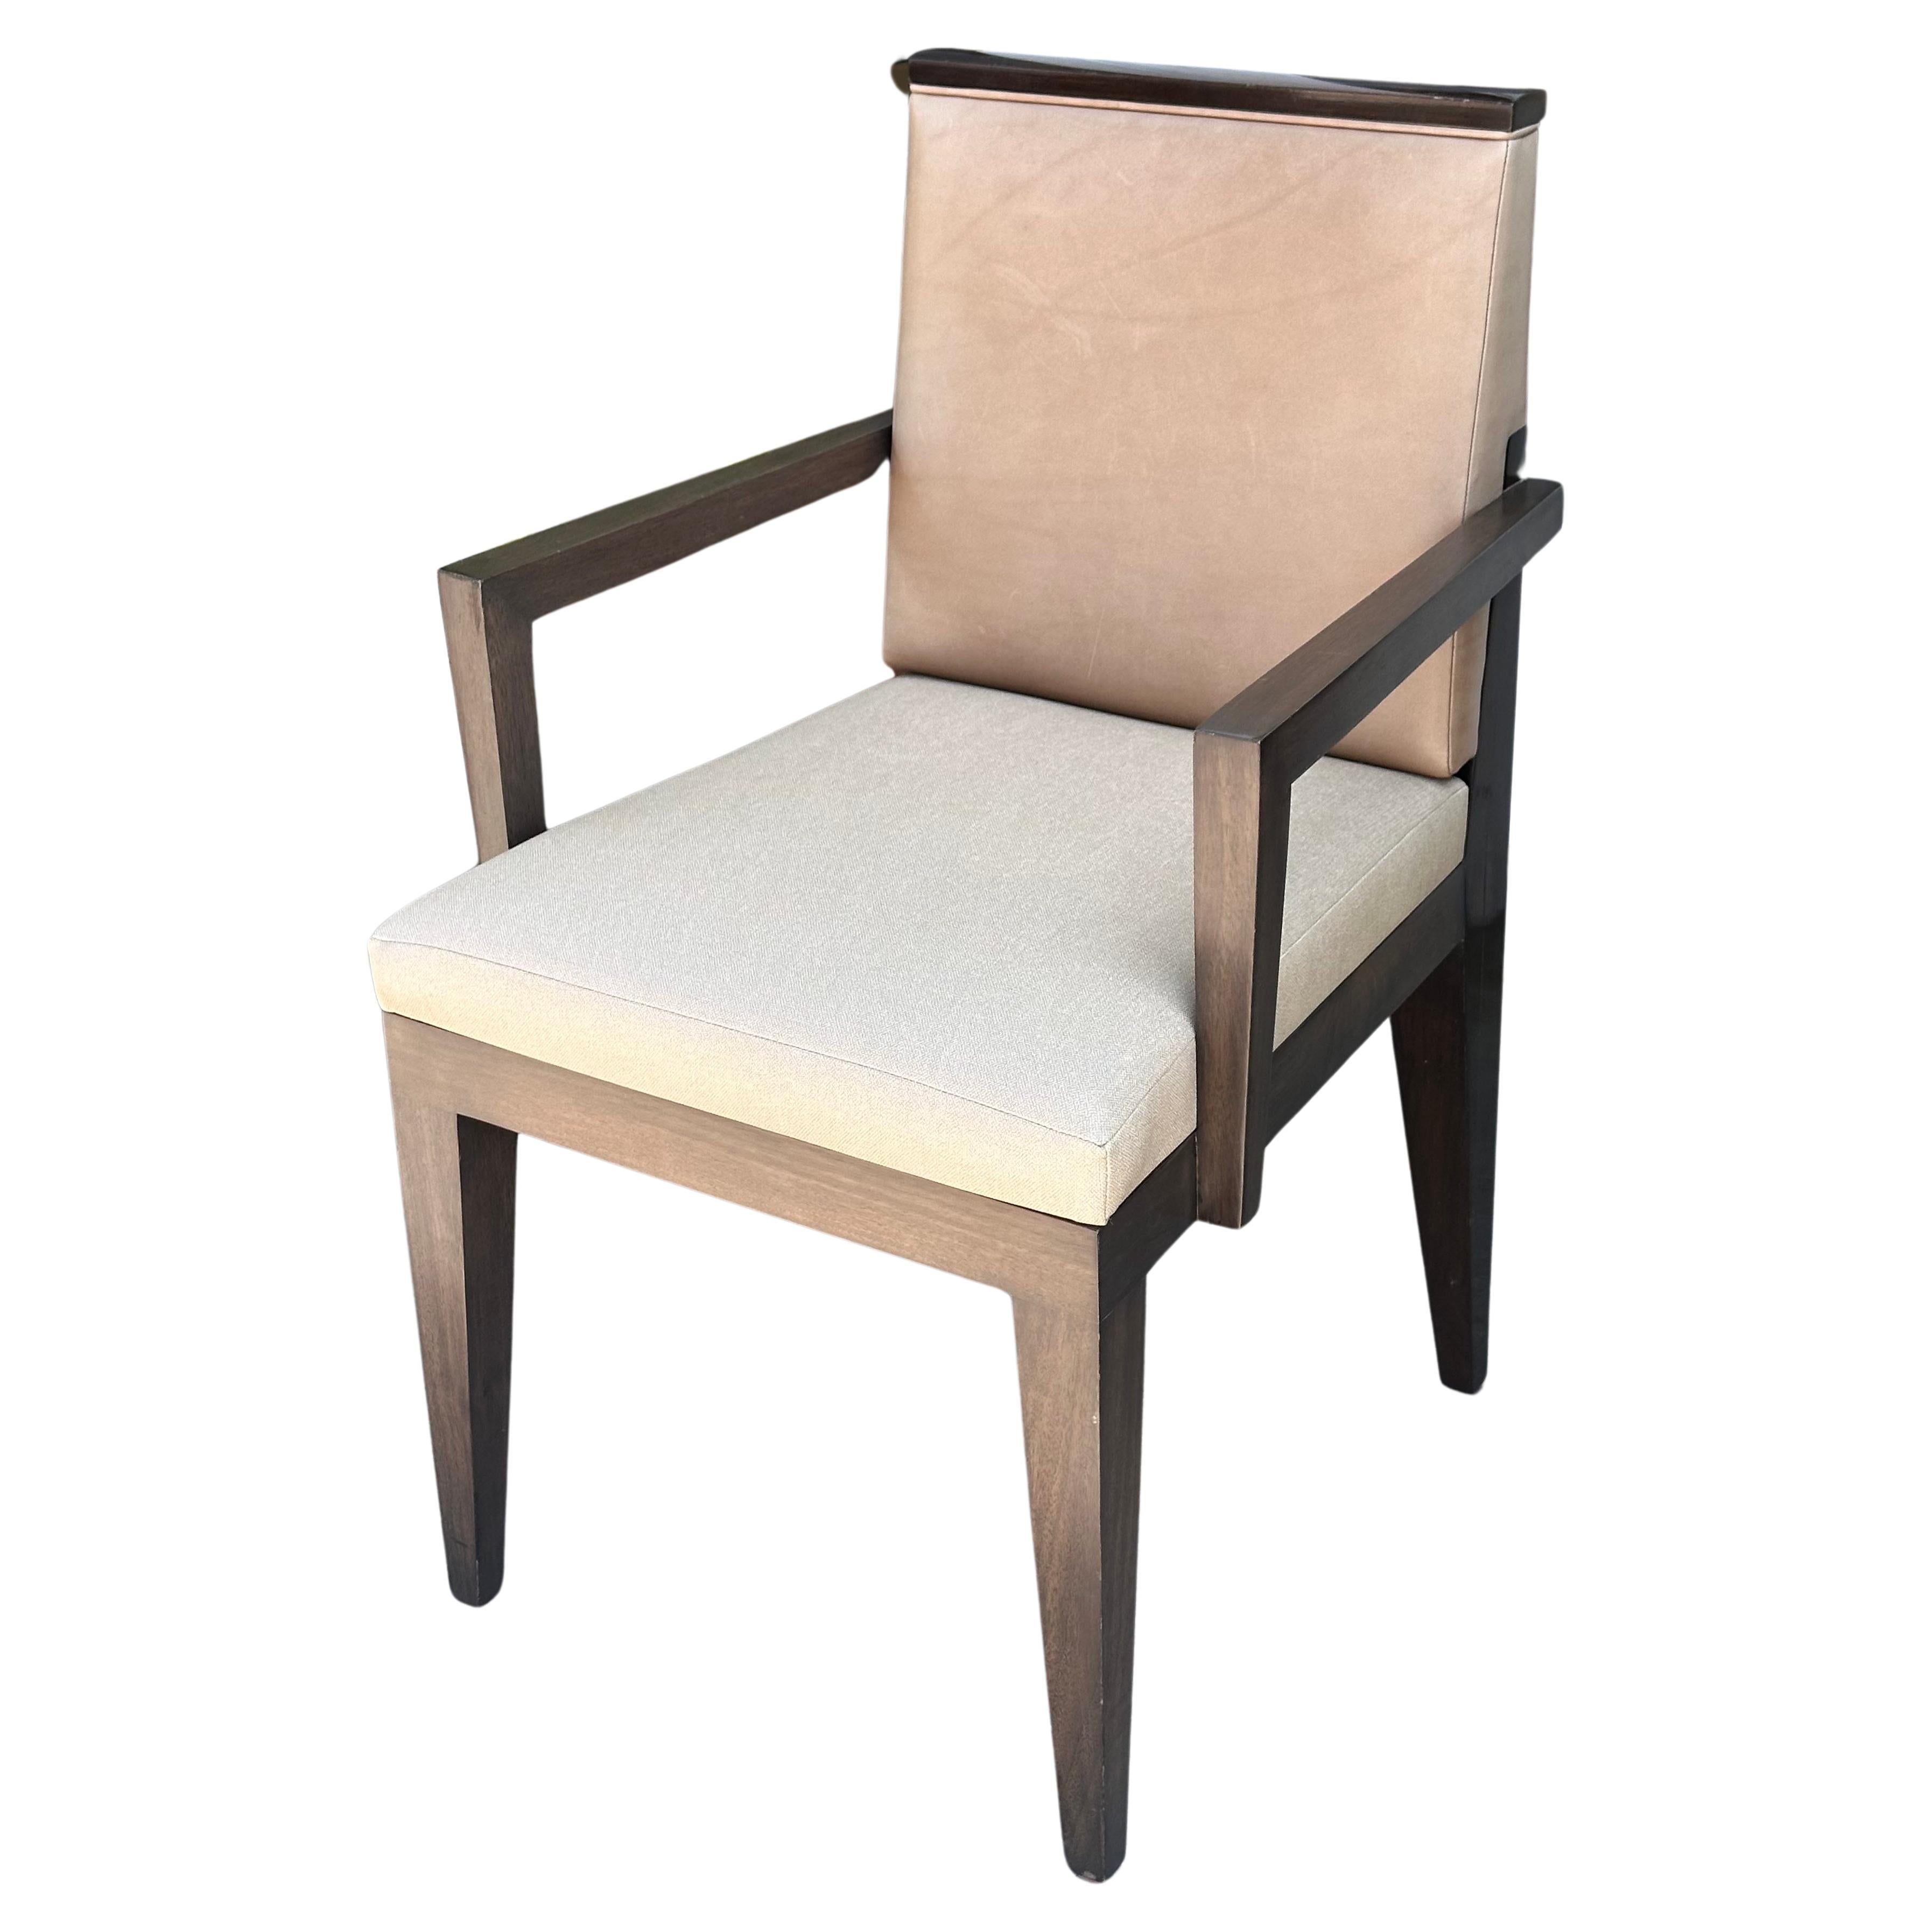 Art Deco Style Robert Marinelli Leather Arm Chair For Sale